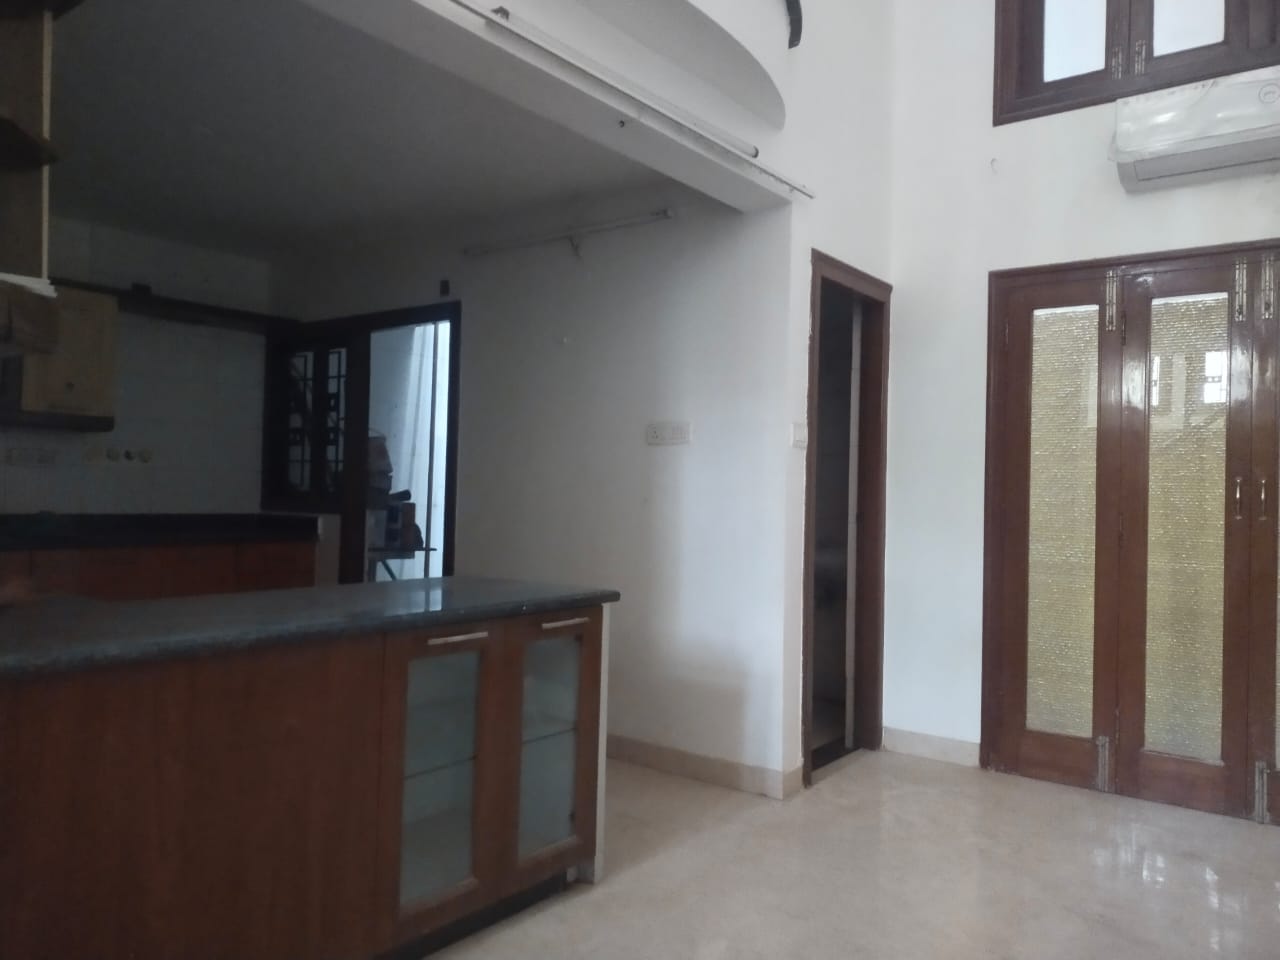 2250 Sq Feet Office Space for Rent Only in Anna Nagar East